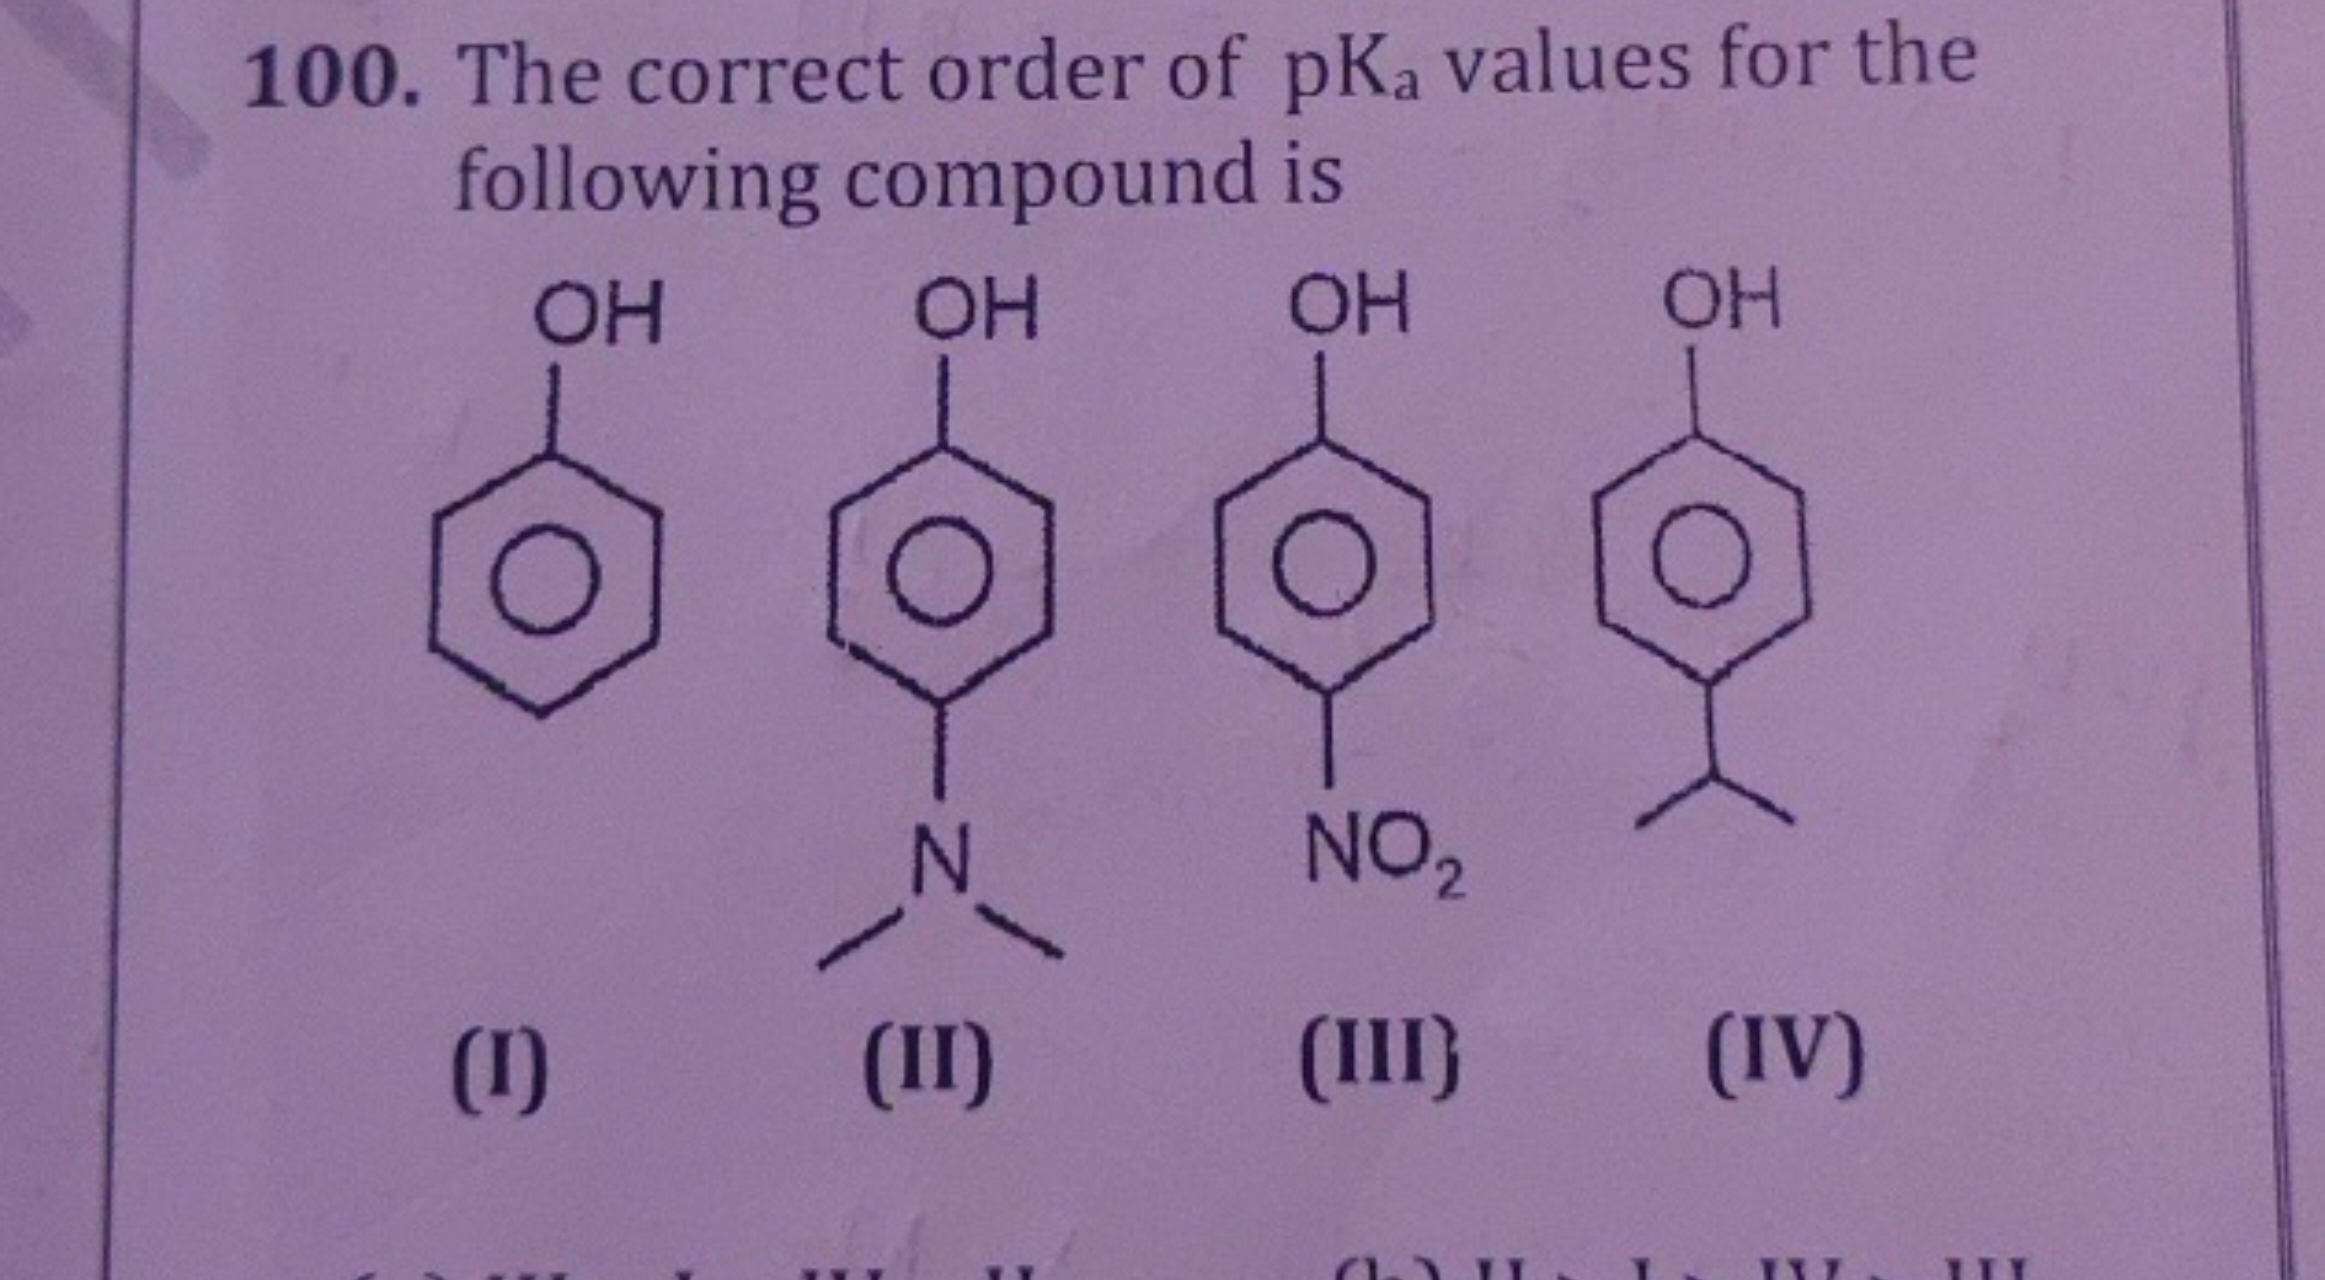 The correct order of pKa​ values for the following compound is Oc1cccc